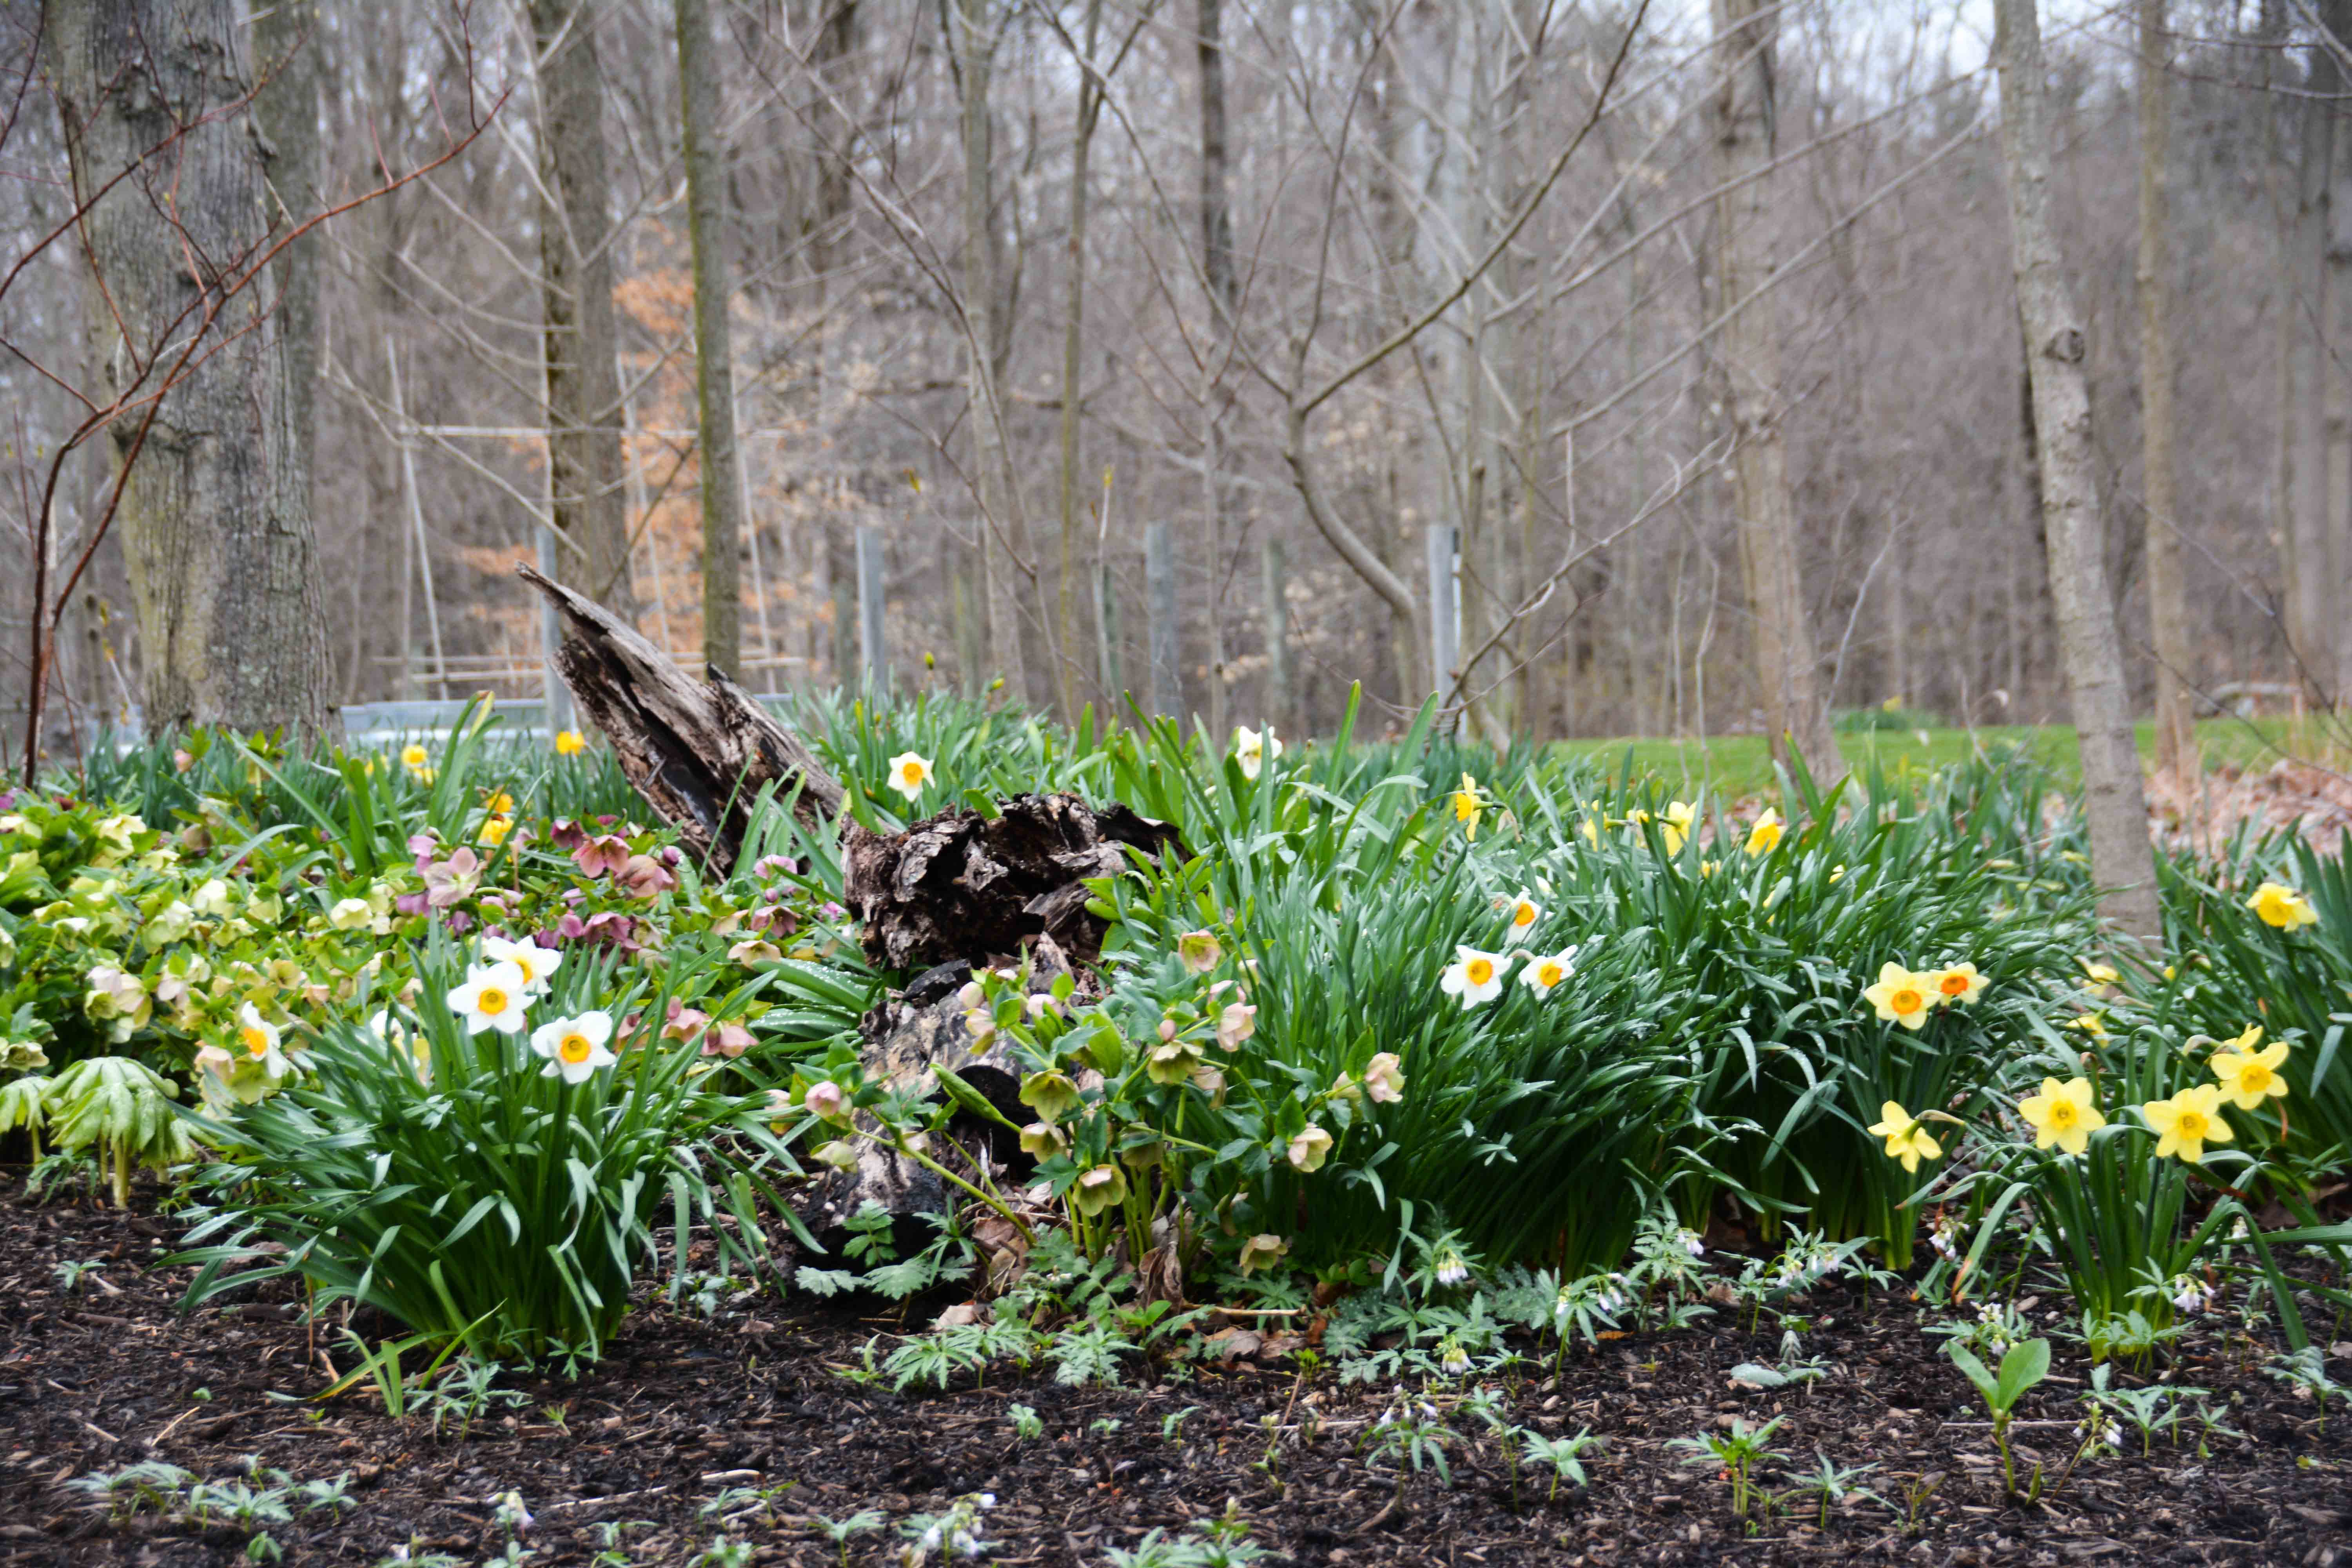 Daffodils for every garden - woodland planting showcases daffodils planted among a variety of hellebore. The hellebore are the moody spring flowers compared to daffodils, but are perfect partners when planted together.  More at Thinkingoutsidetheboxwood.com